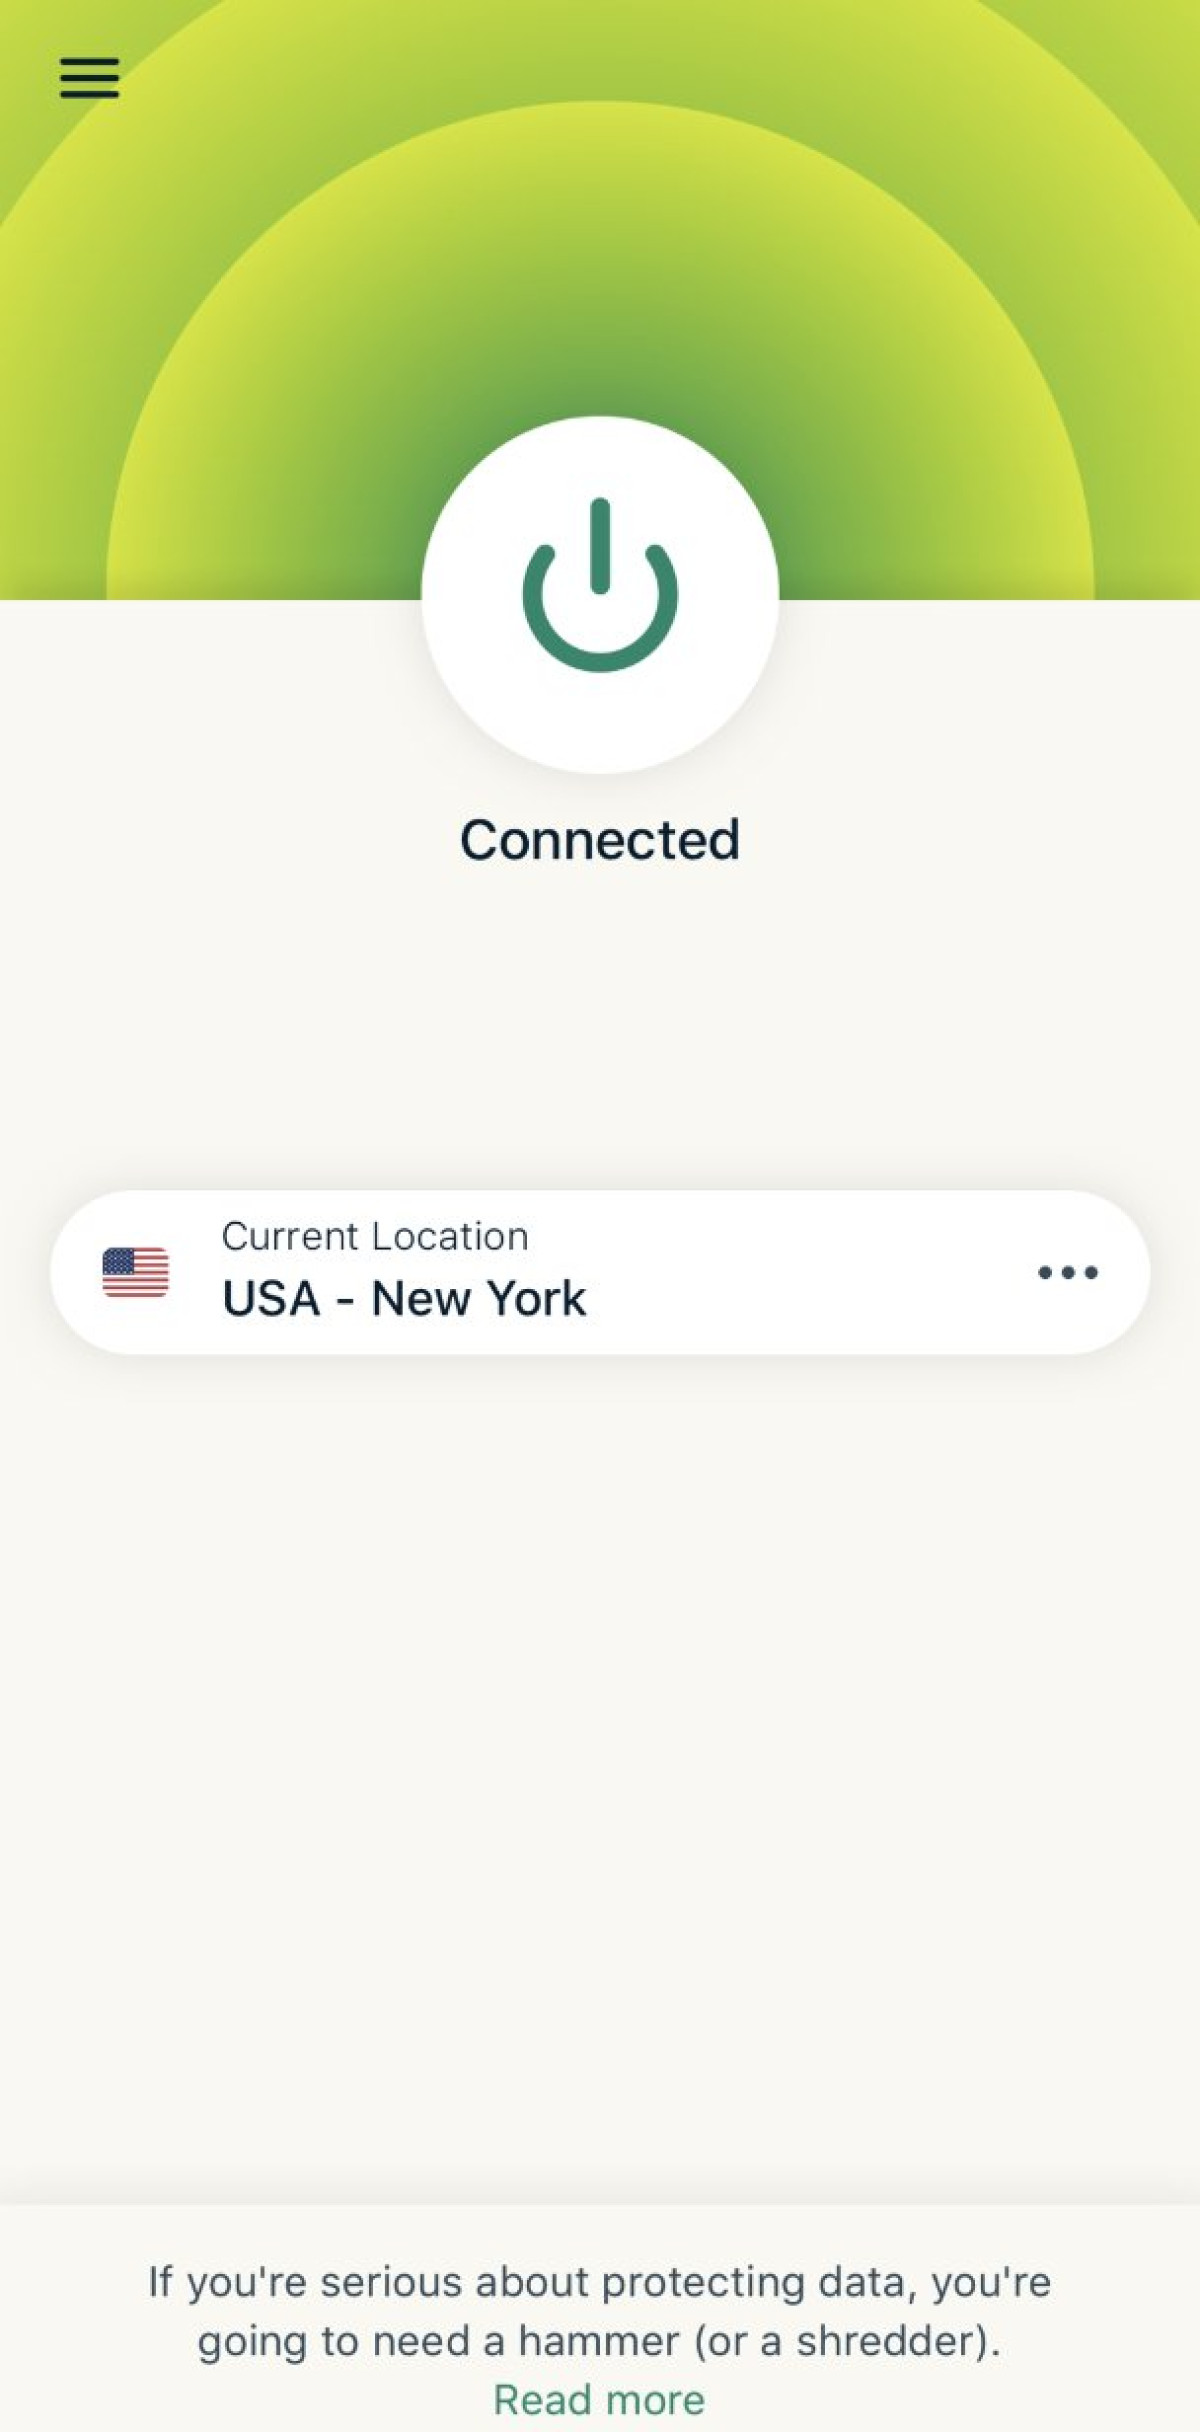 Connected to ExpressVPN on iOS